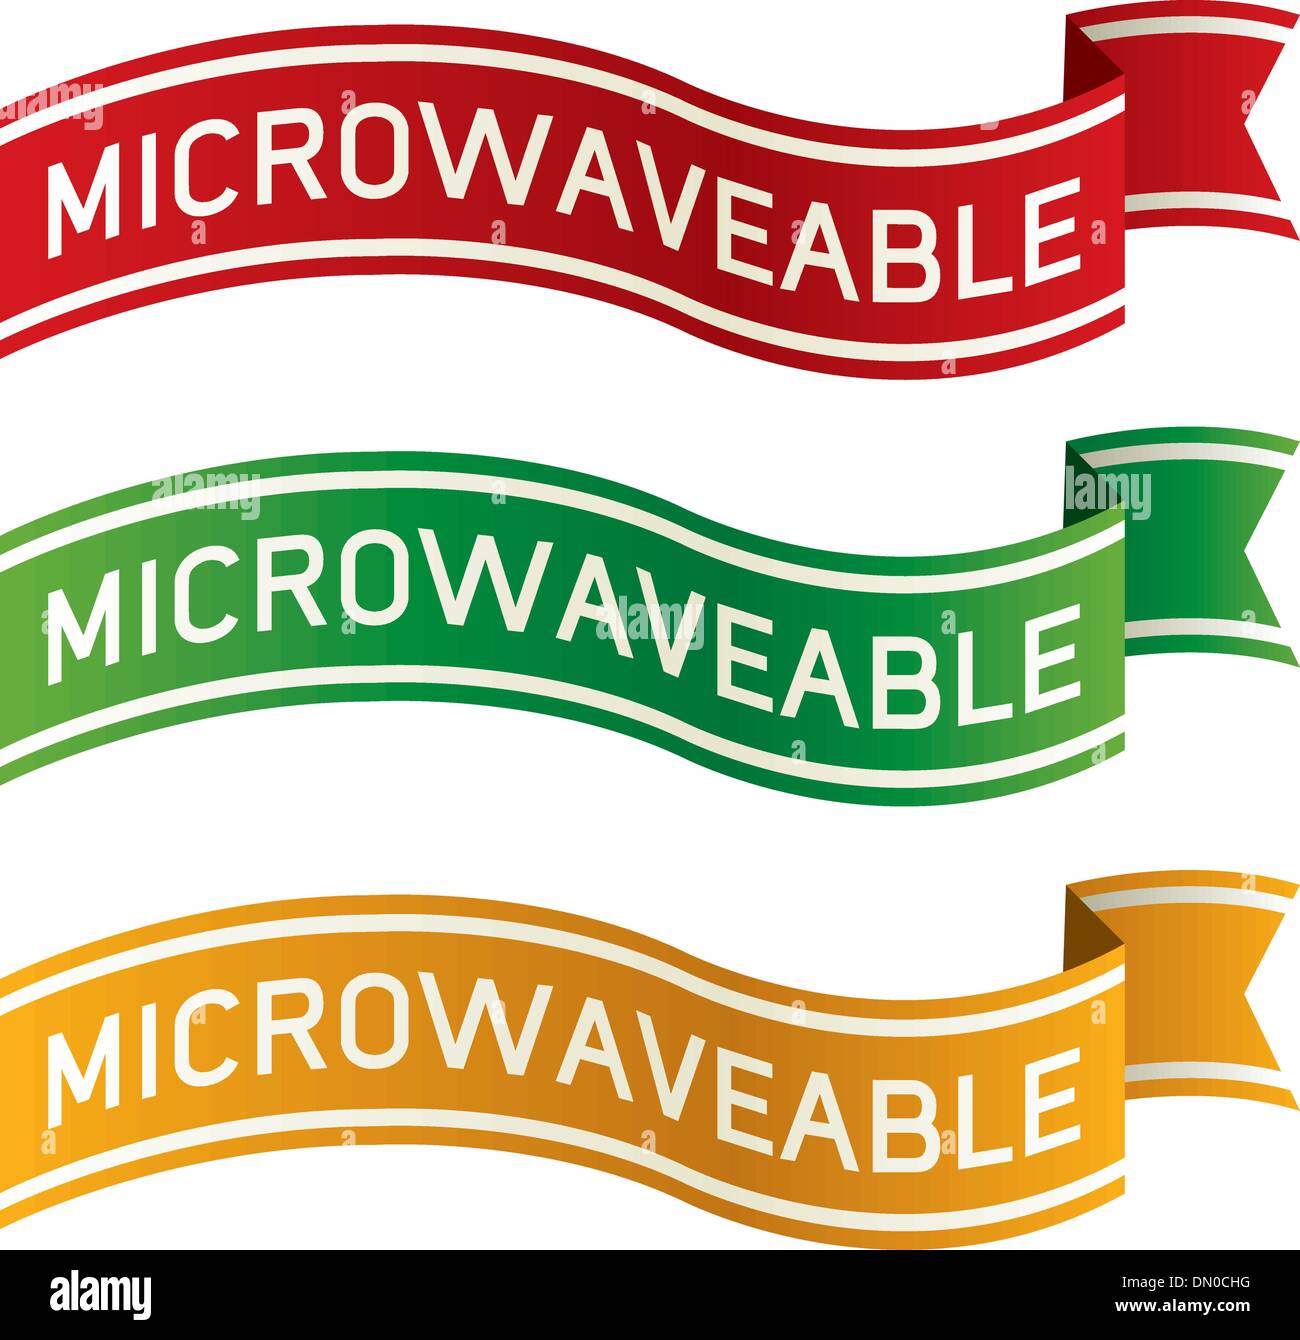 Microwaveable food label Stock Vector